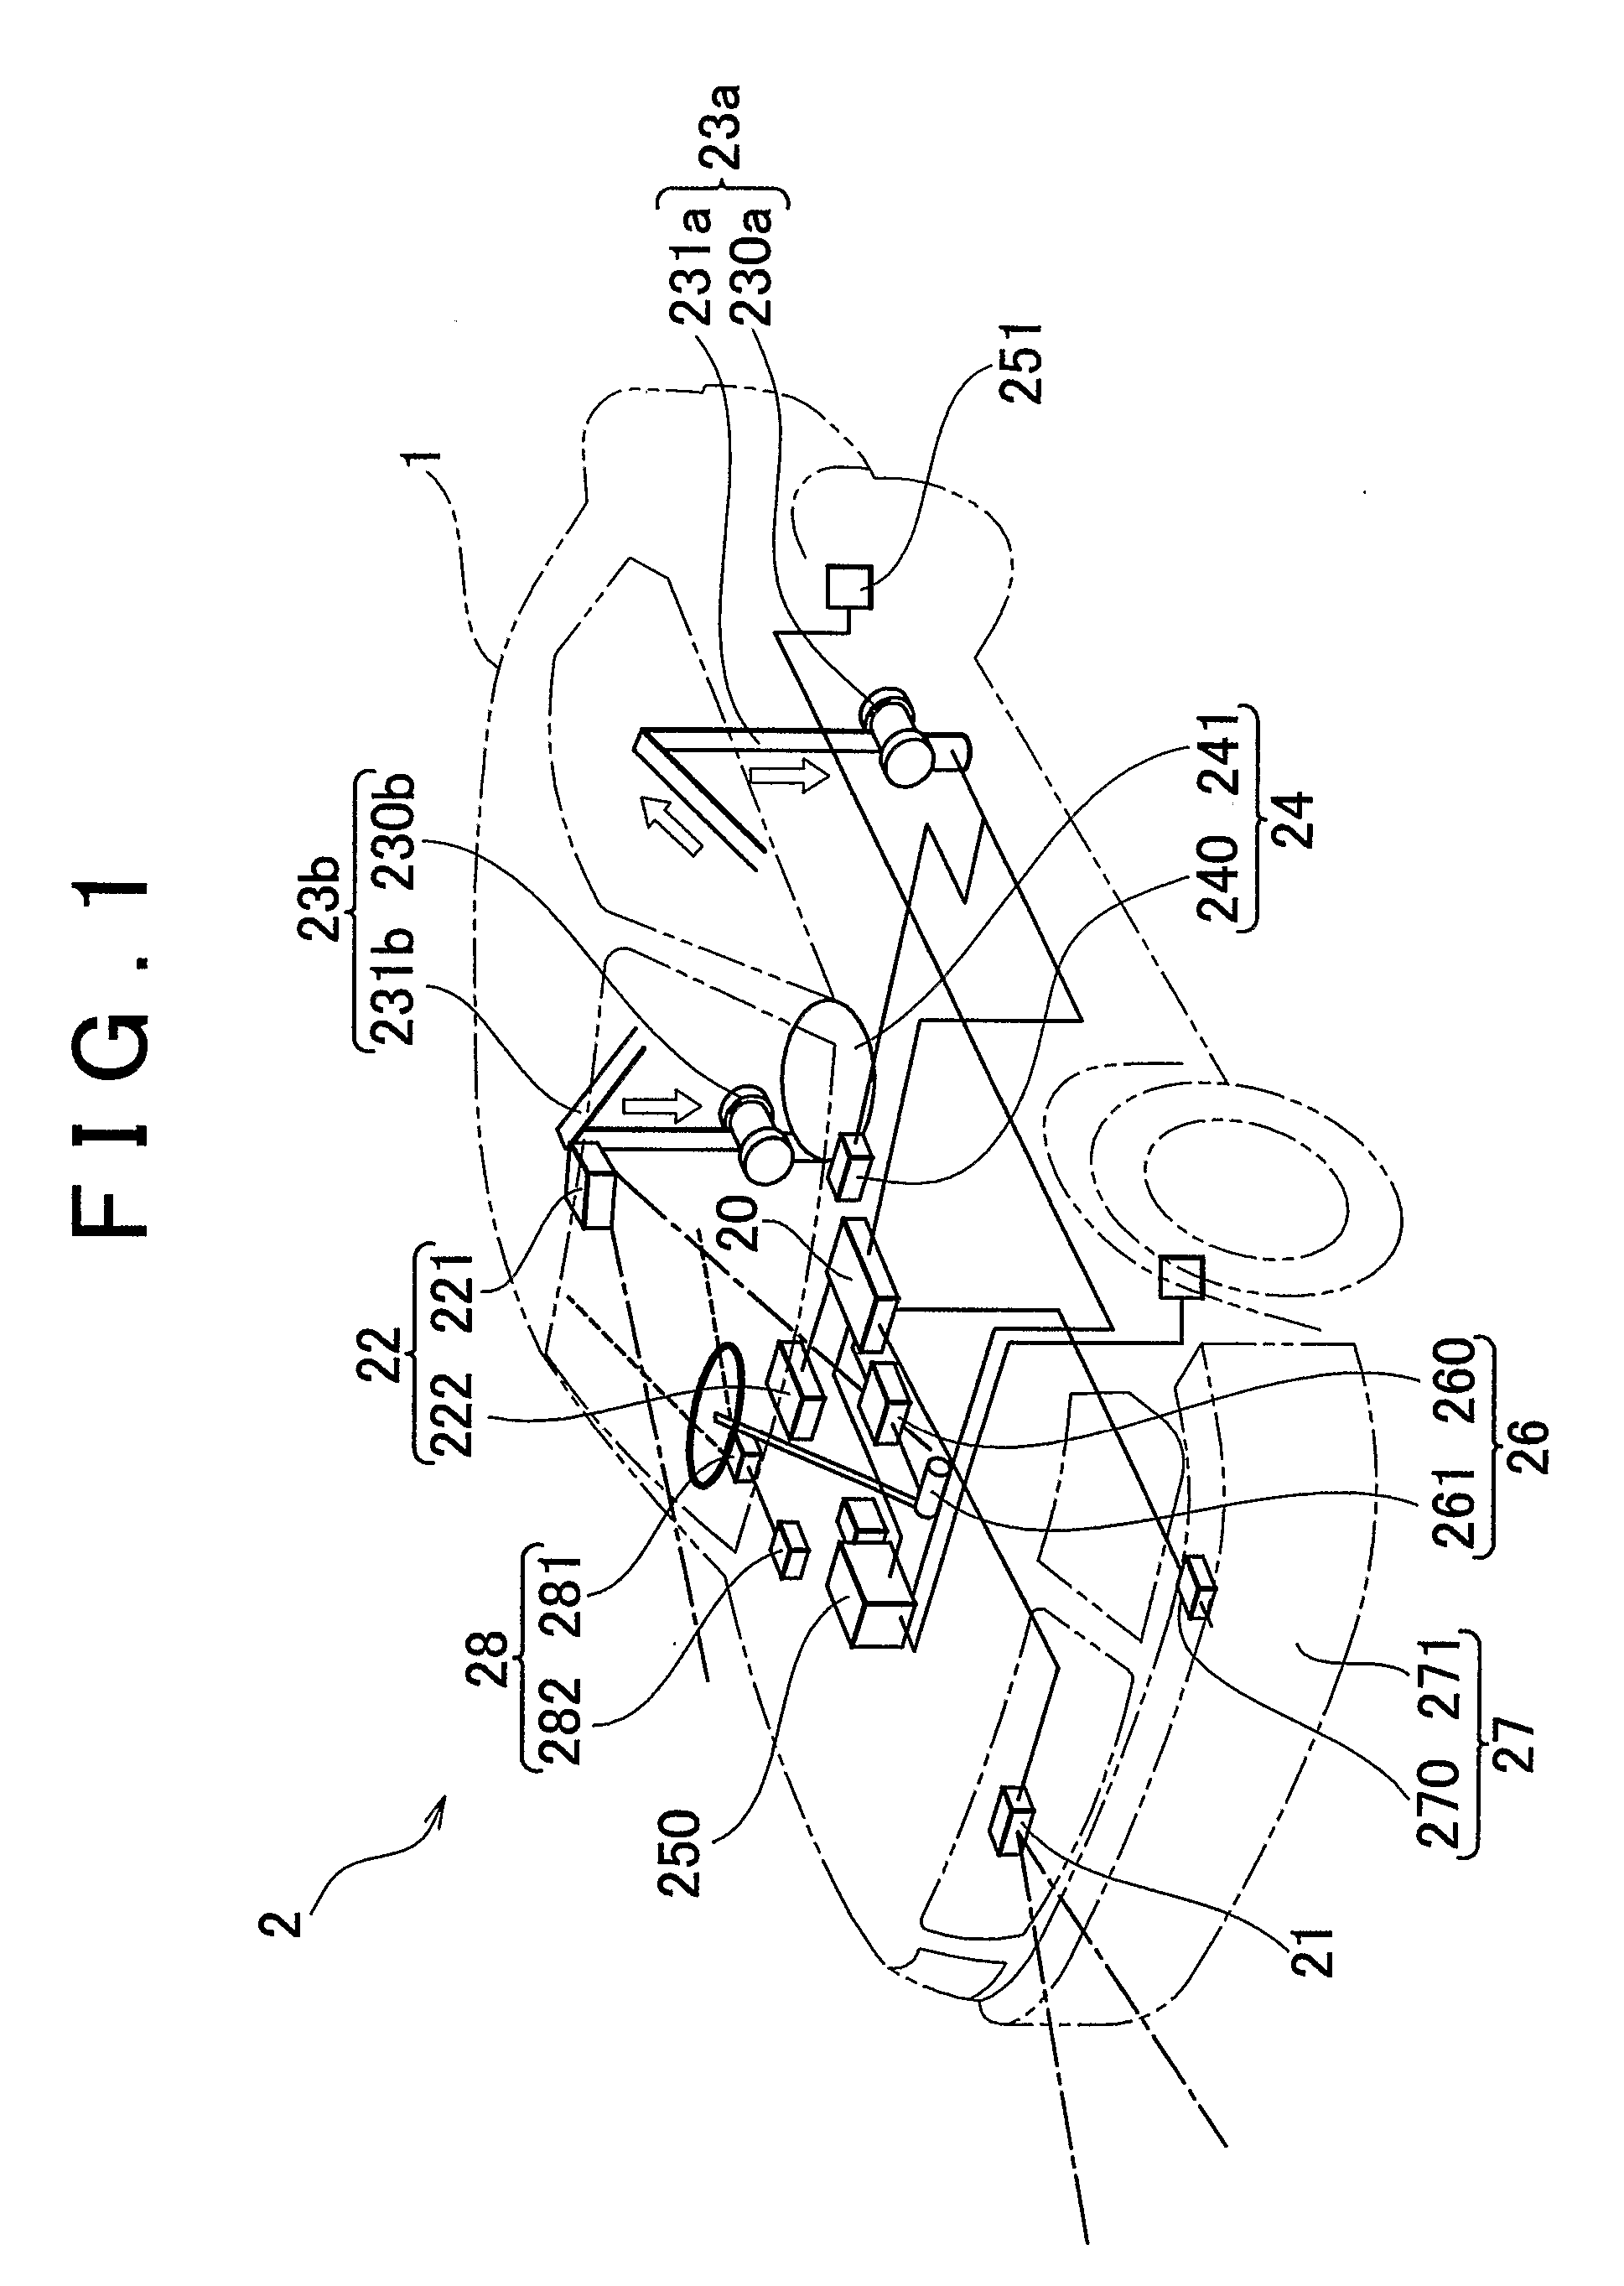 Running support system for vehicle